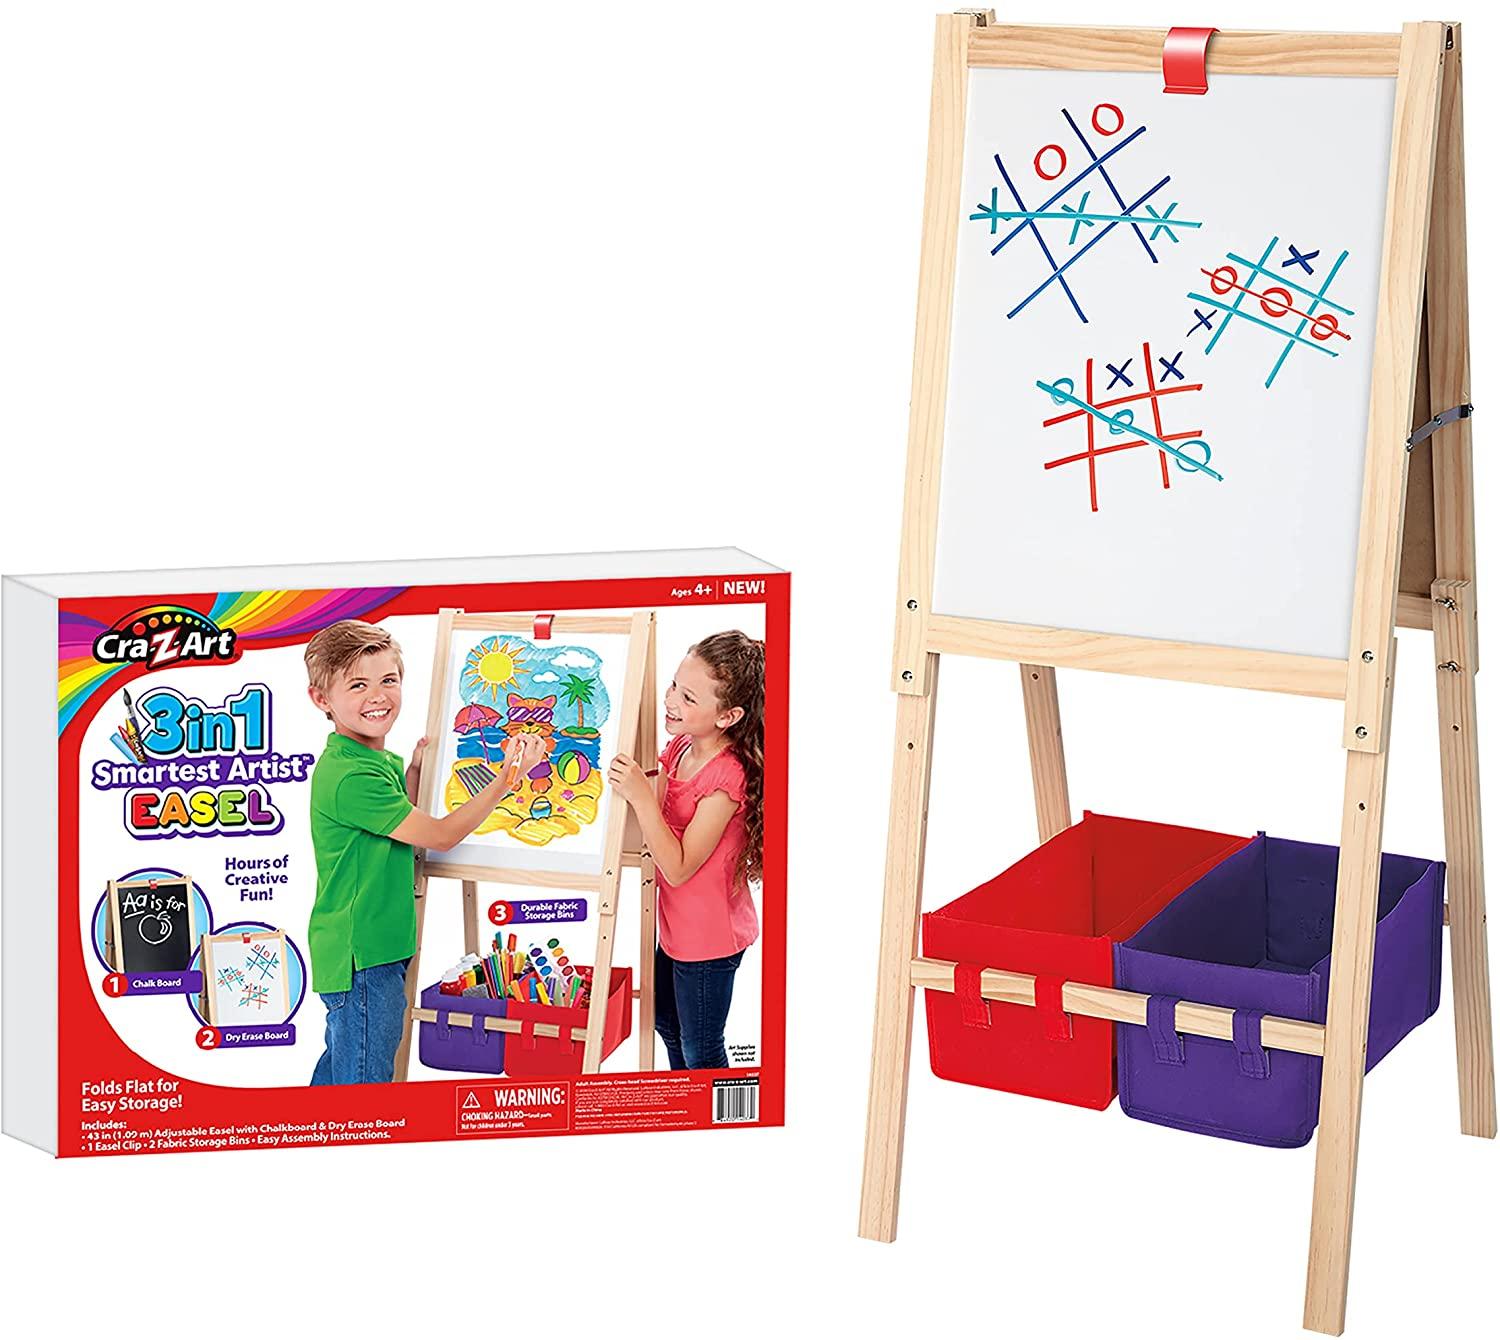 Cra-Z-Art 3-in-1 Smartest Artist Standing Easel with Chalk Board for $24.97